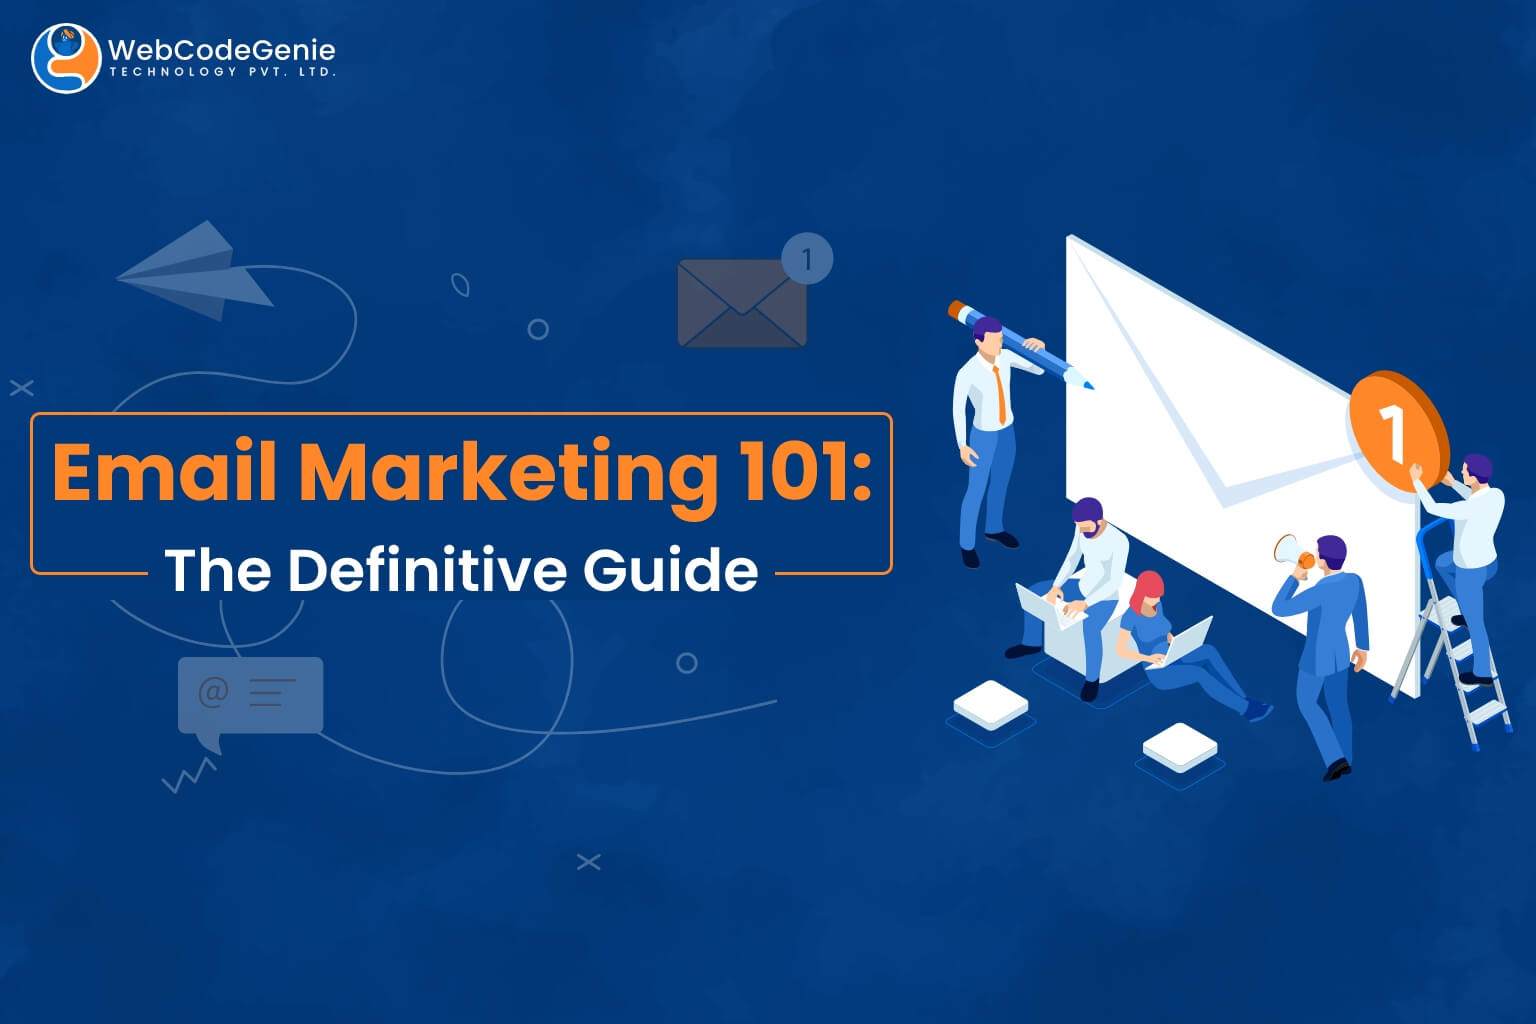 Email Marketing 101 The Definitive Guide